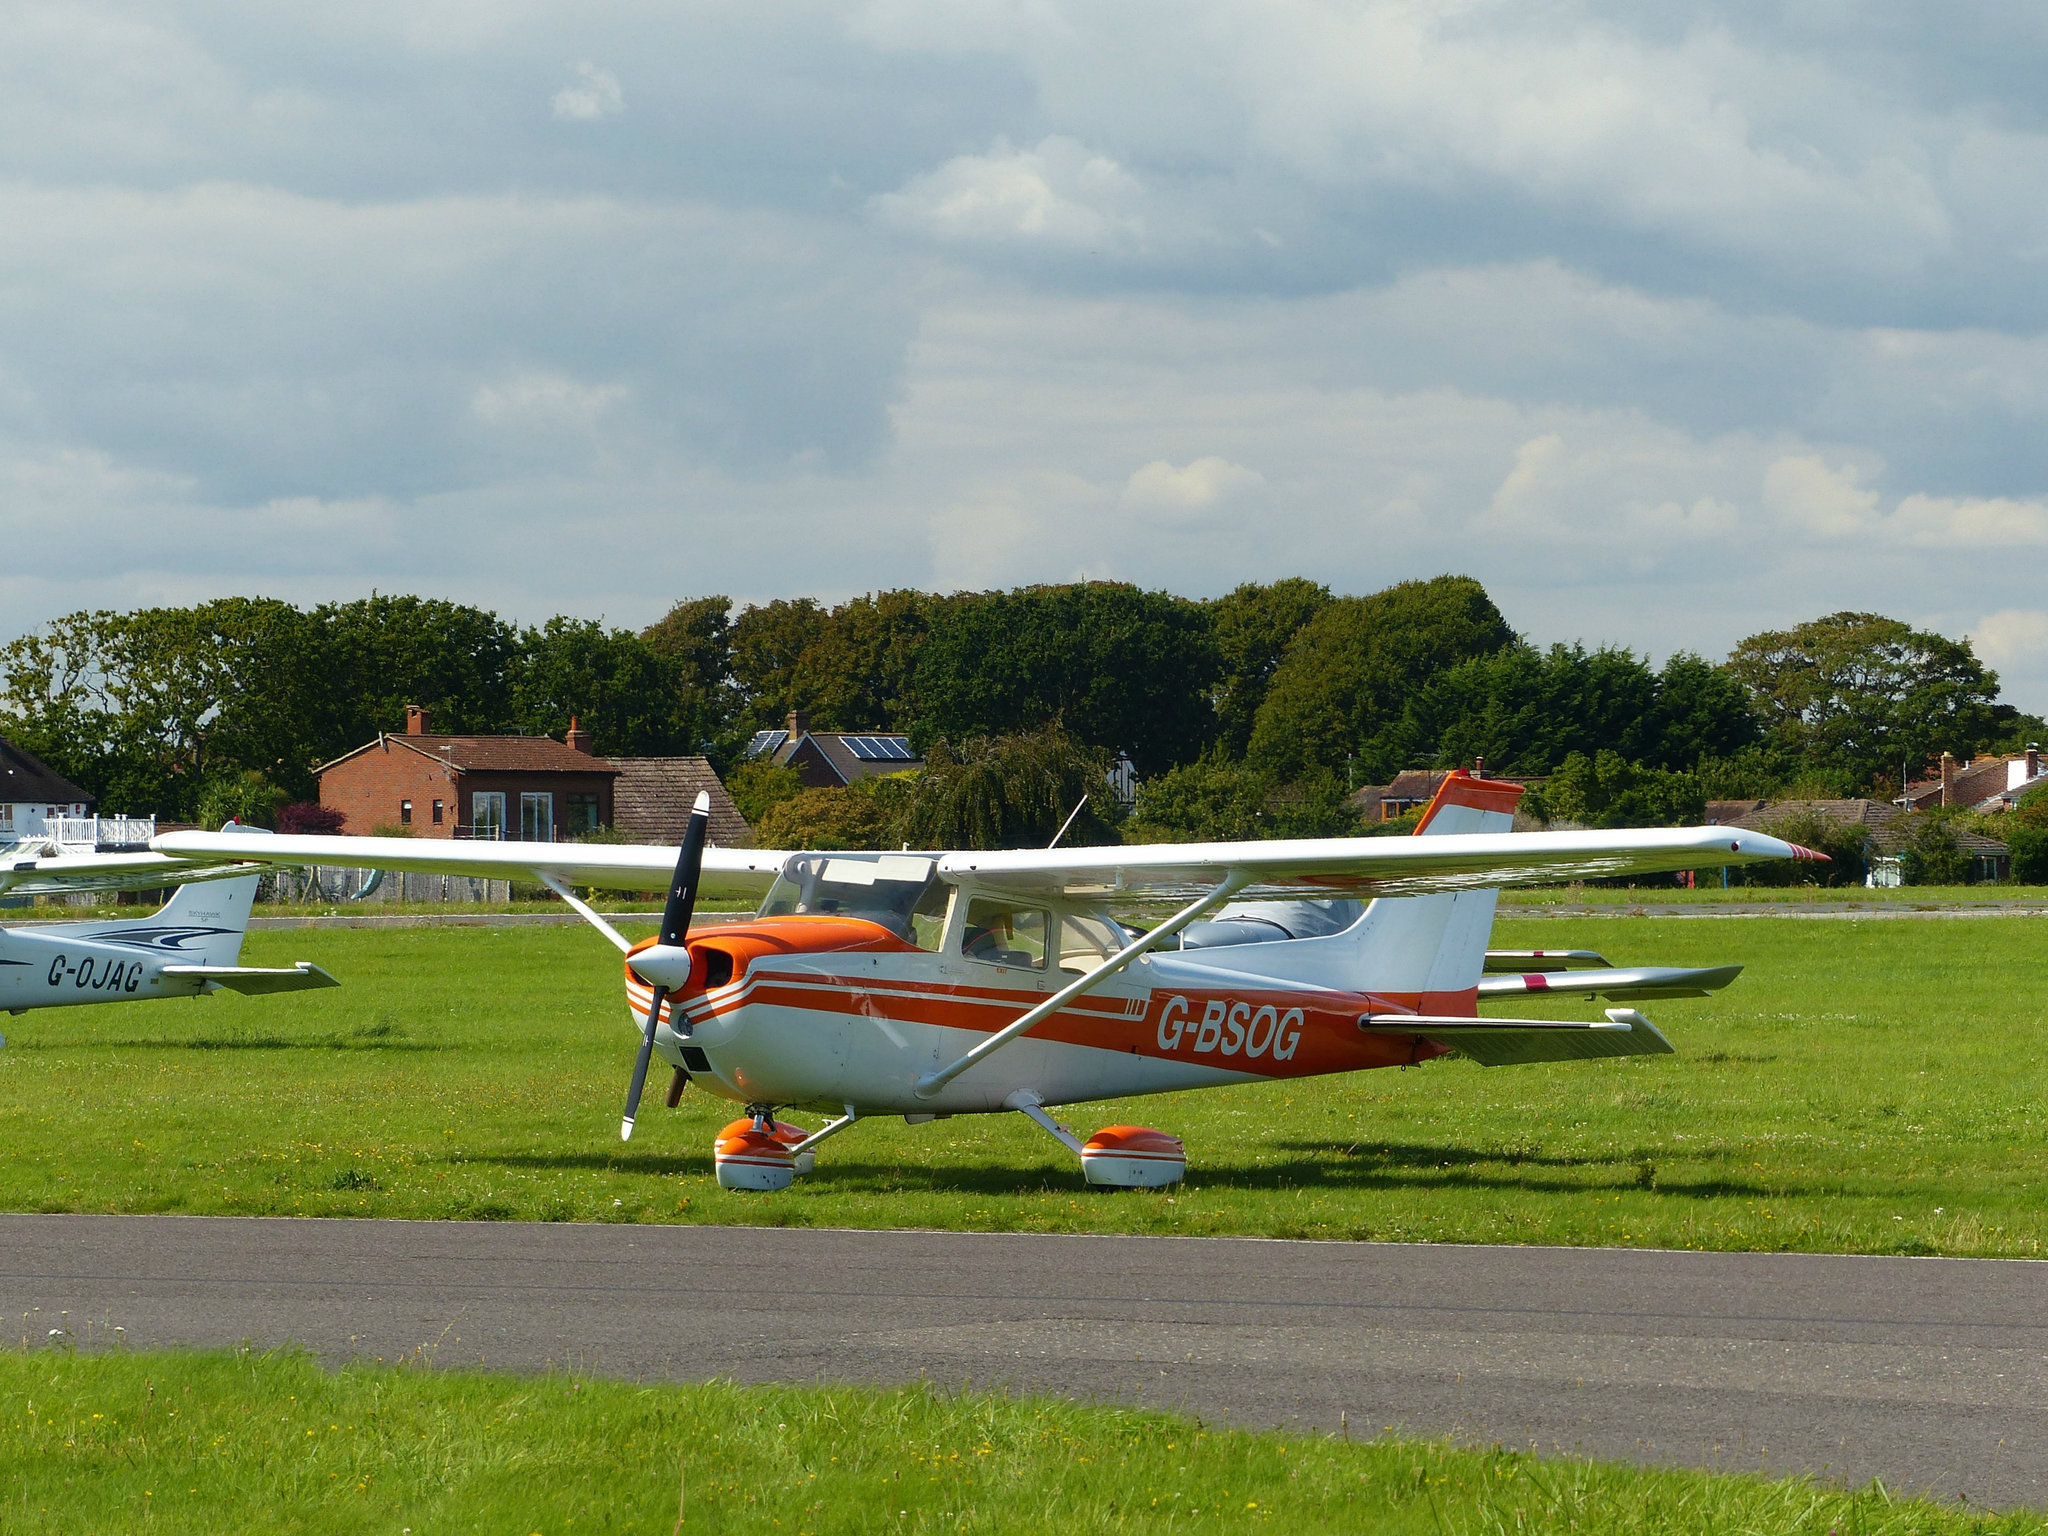 G-BSOG at Solent Airport - 13 August 2017